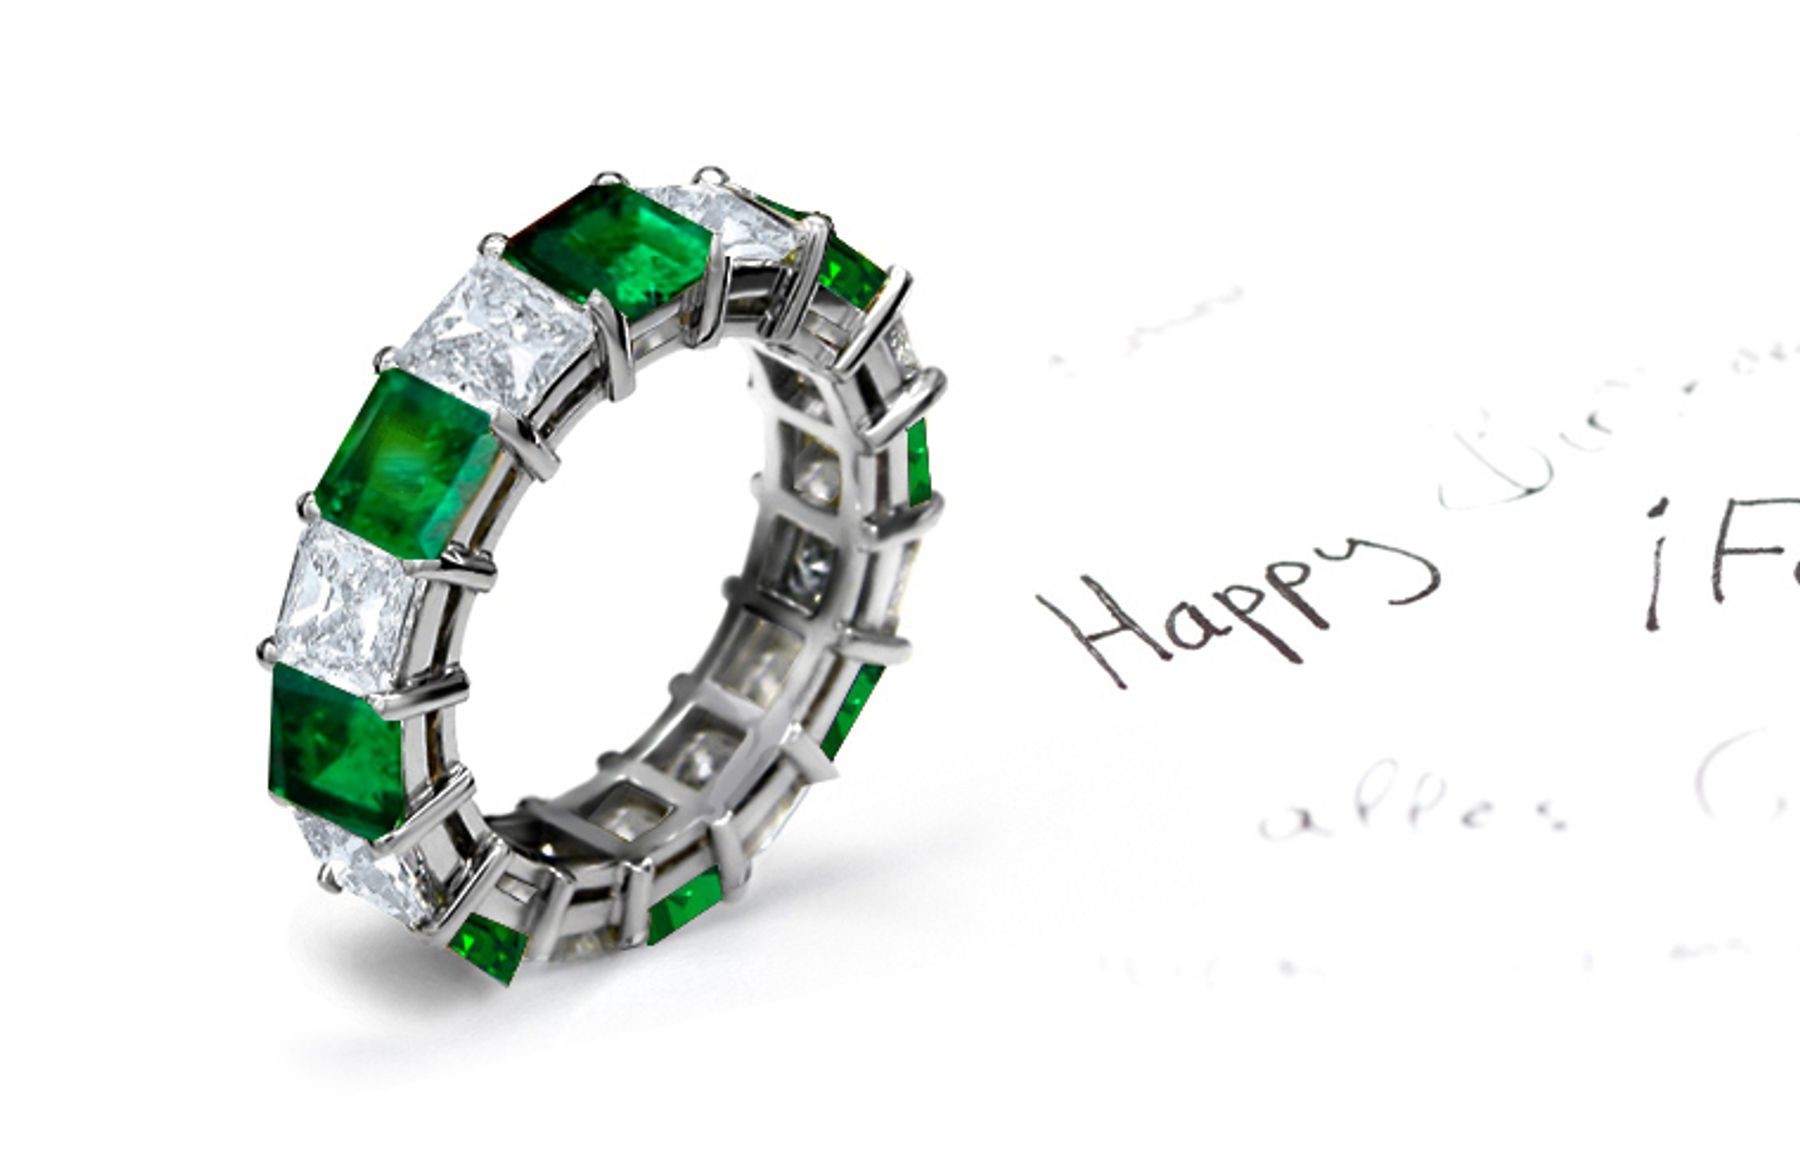  Eternity Ring: Stylish Emerald Square and Princess Cut Diamonds Bar Set Rings in 14K White Gold.